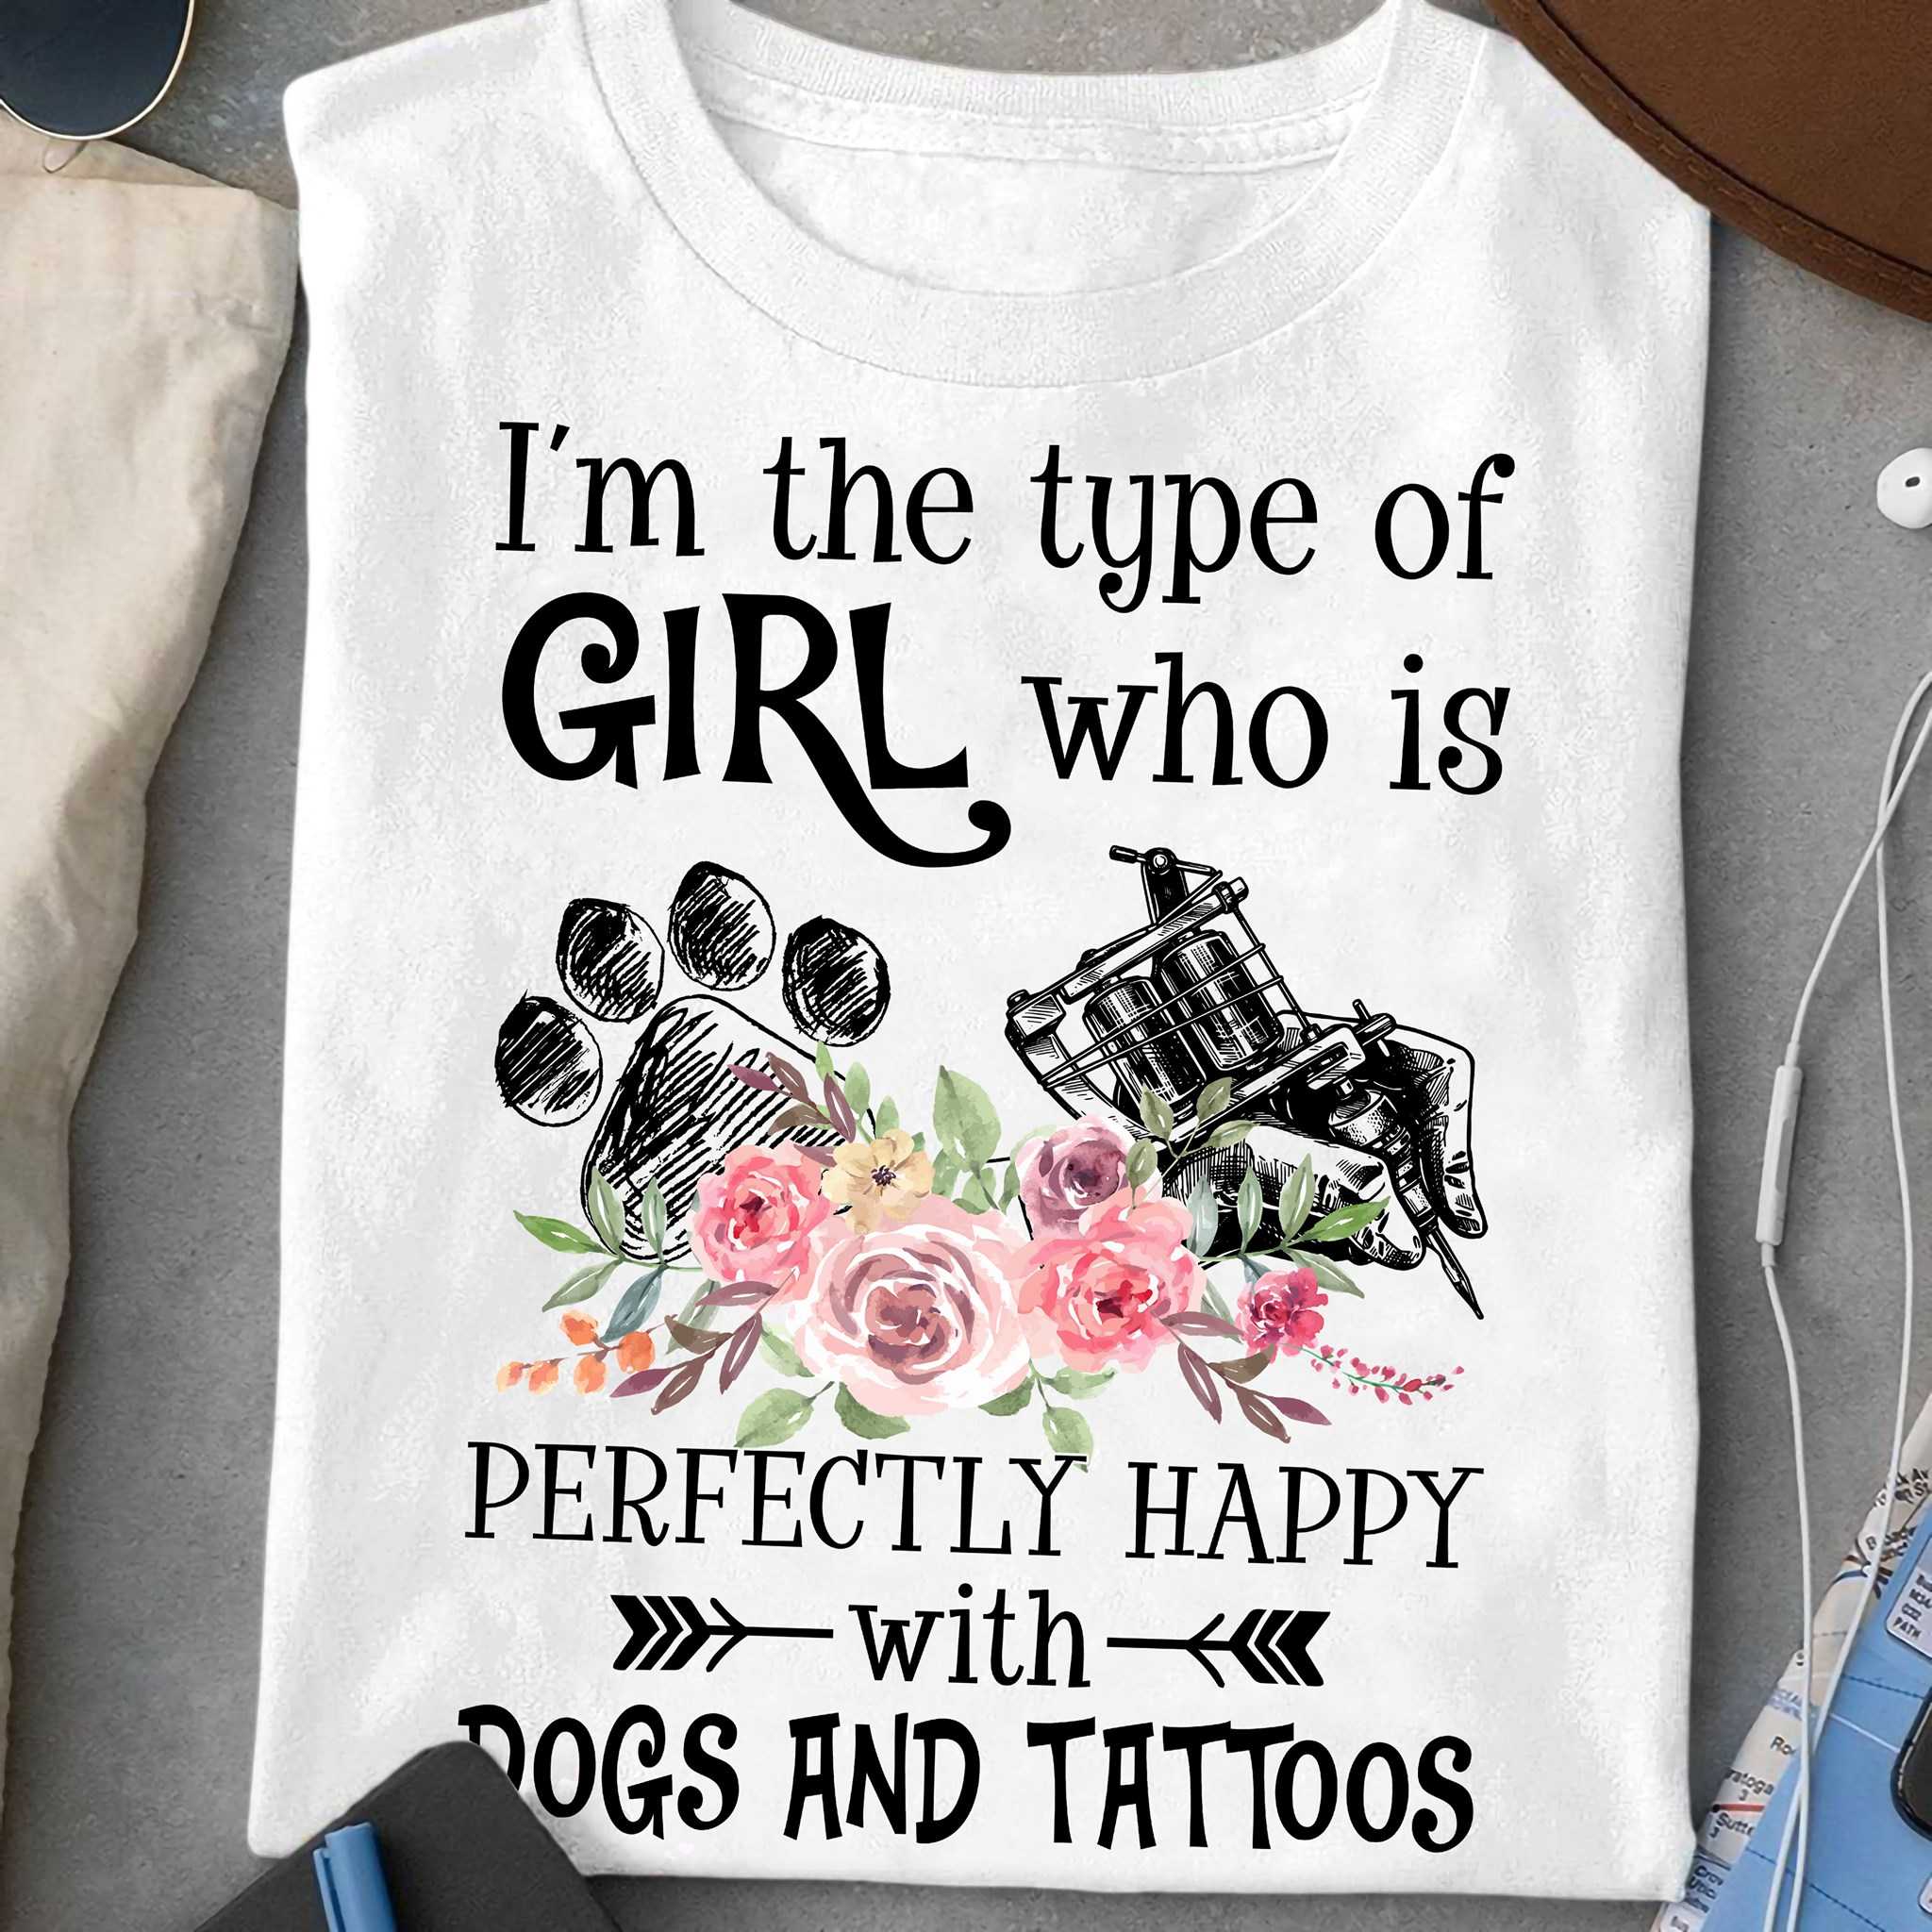 I'm the type of girl who is perfectly happy with dogs and tattoos - tattooed girl